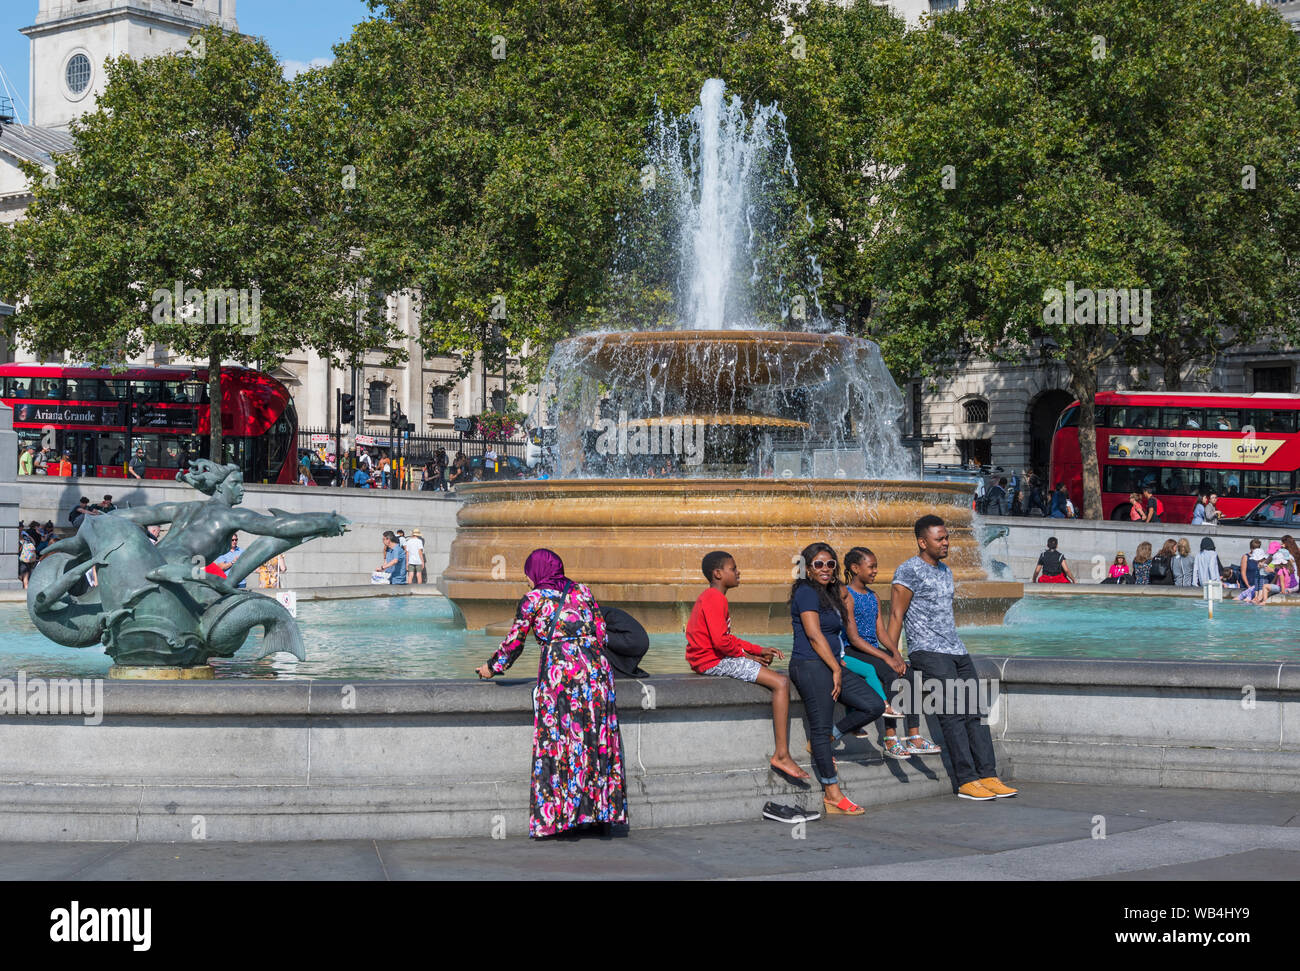 Fountain and tourists in Trafalgar Square, Charing Cross, City of Westminster, Central London, England, UK. Stock Photo